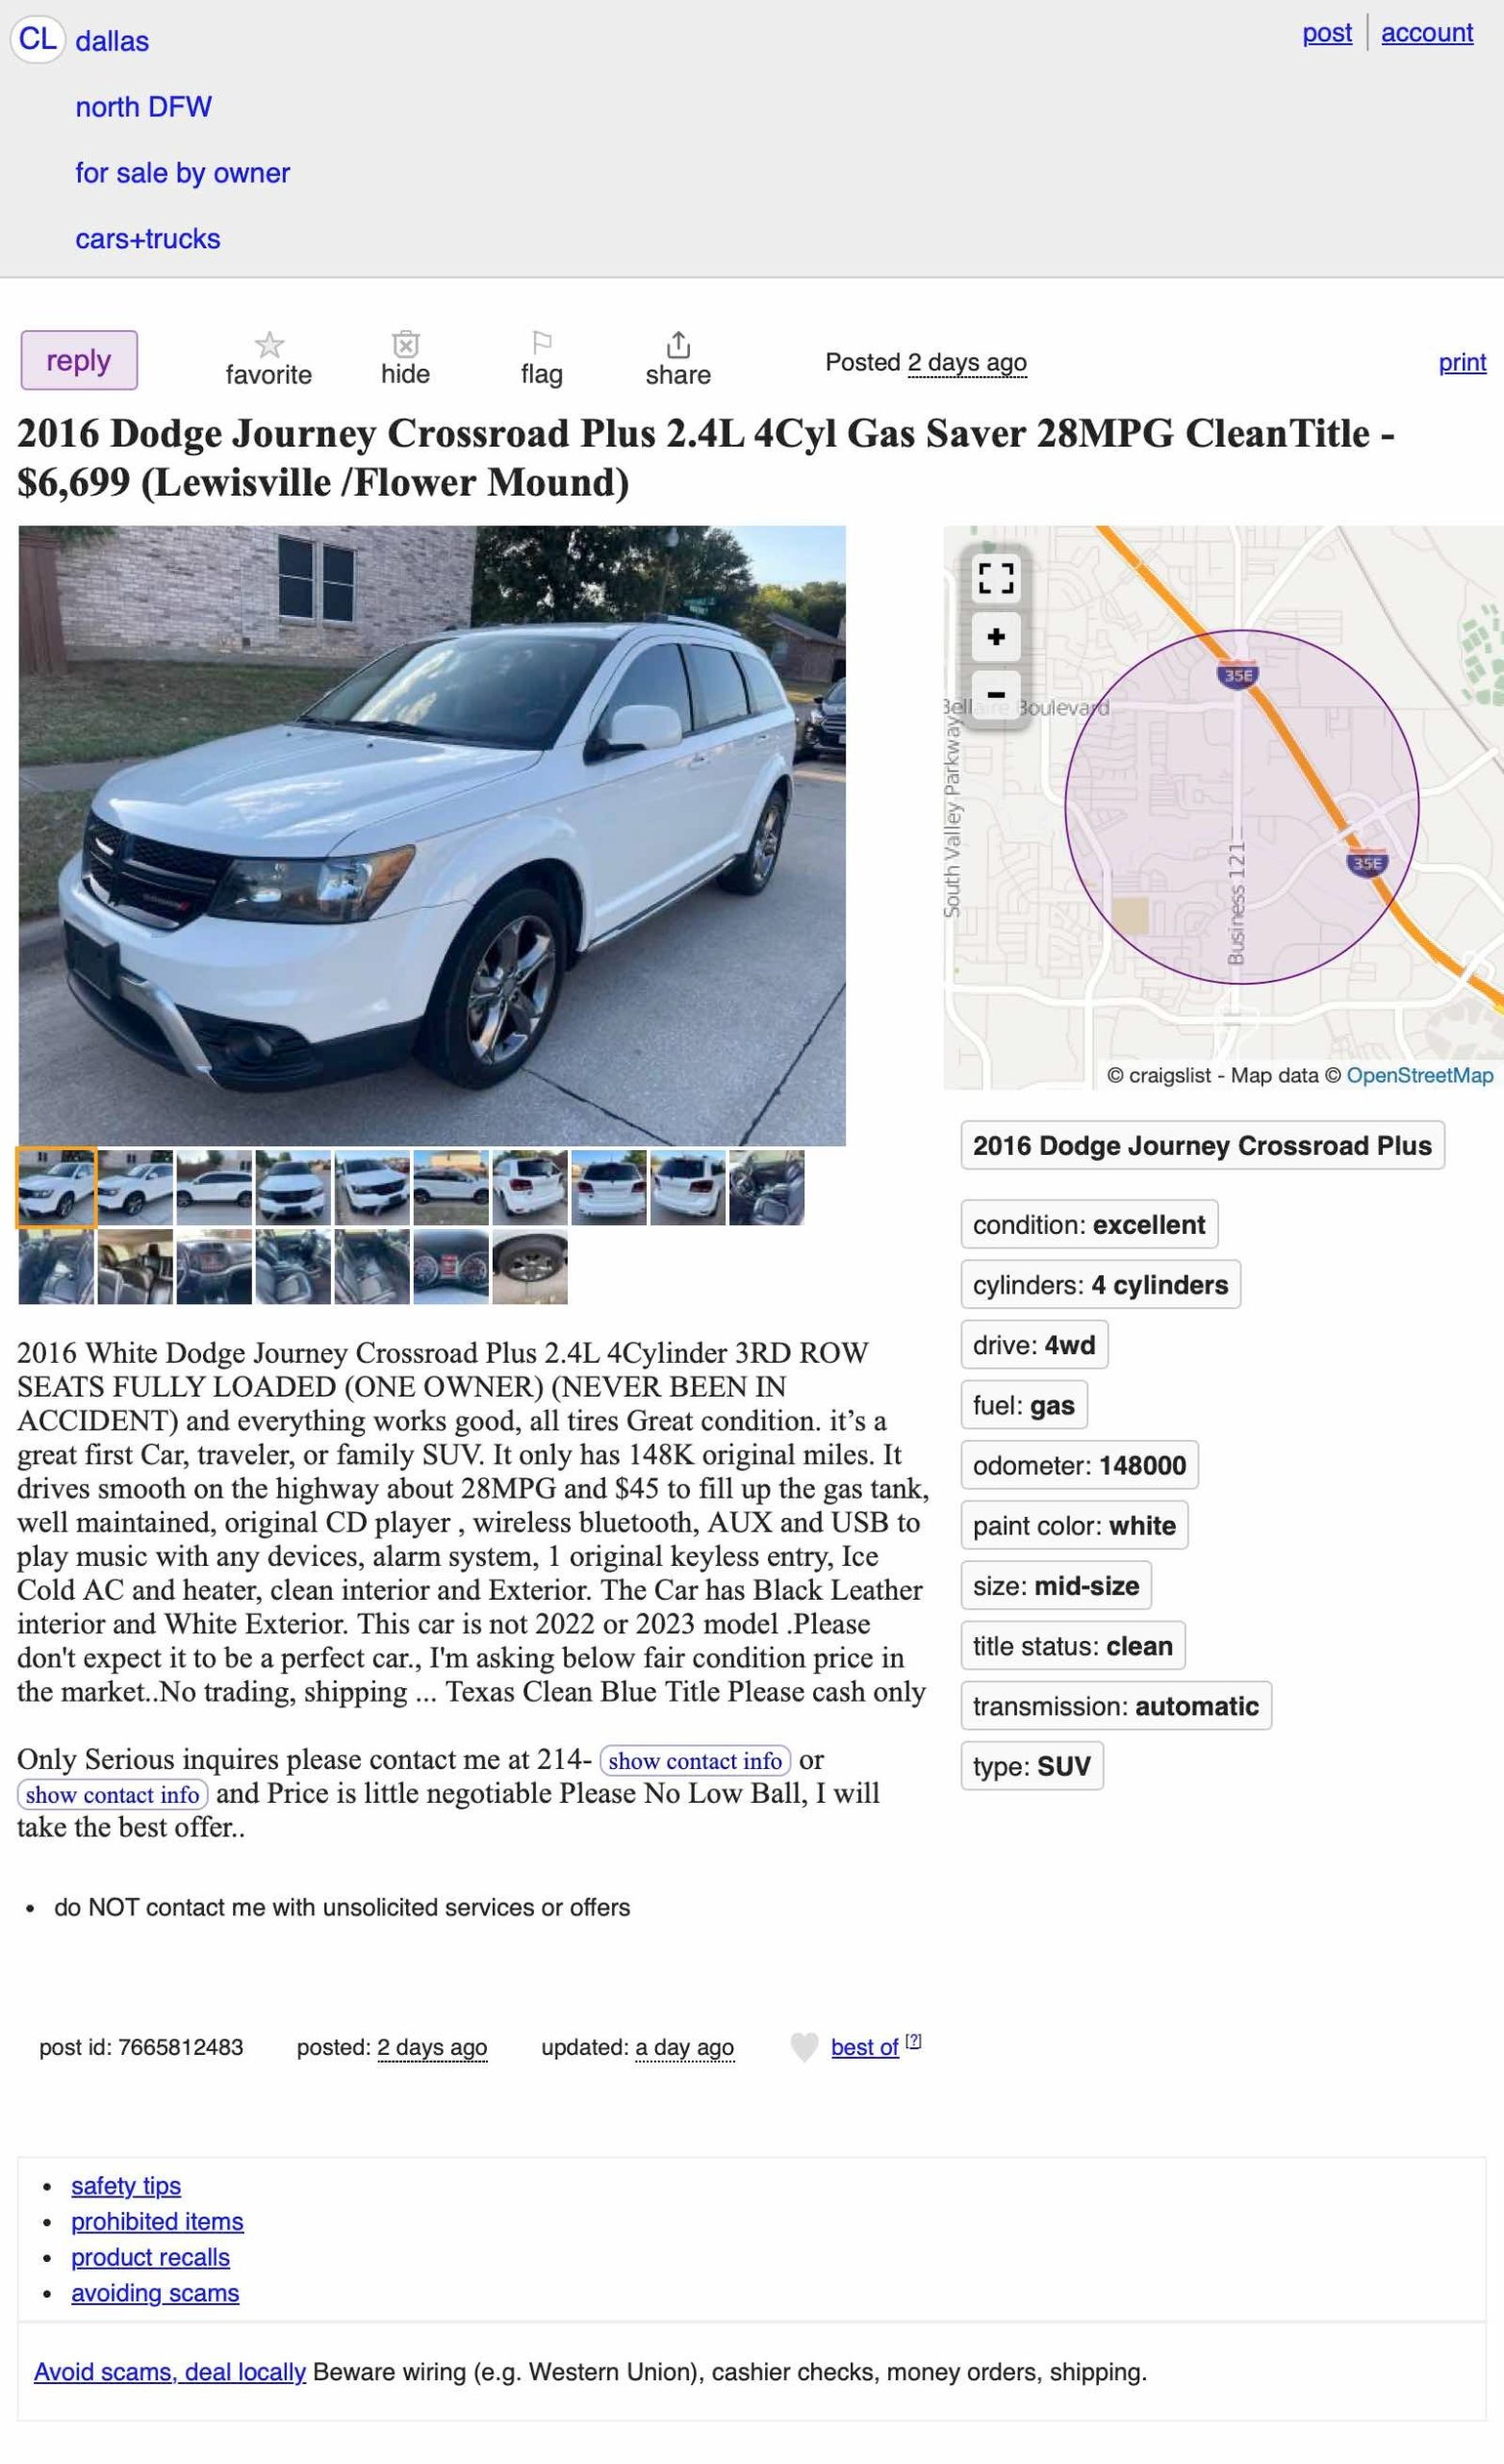 at $6,699, would you go on this 2016 dodge journey?